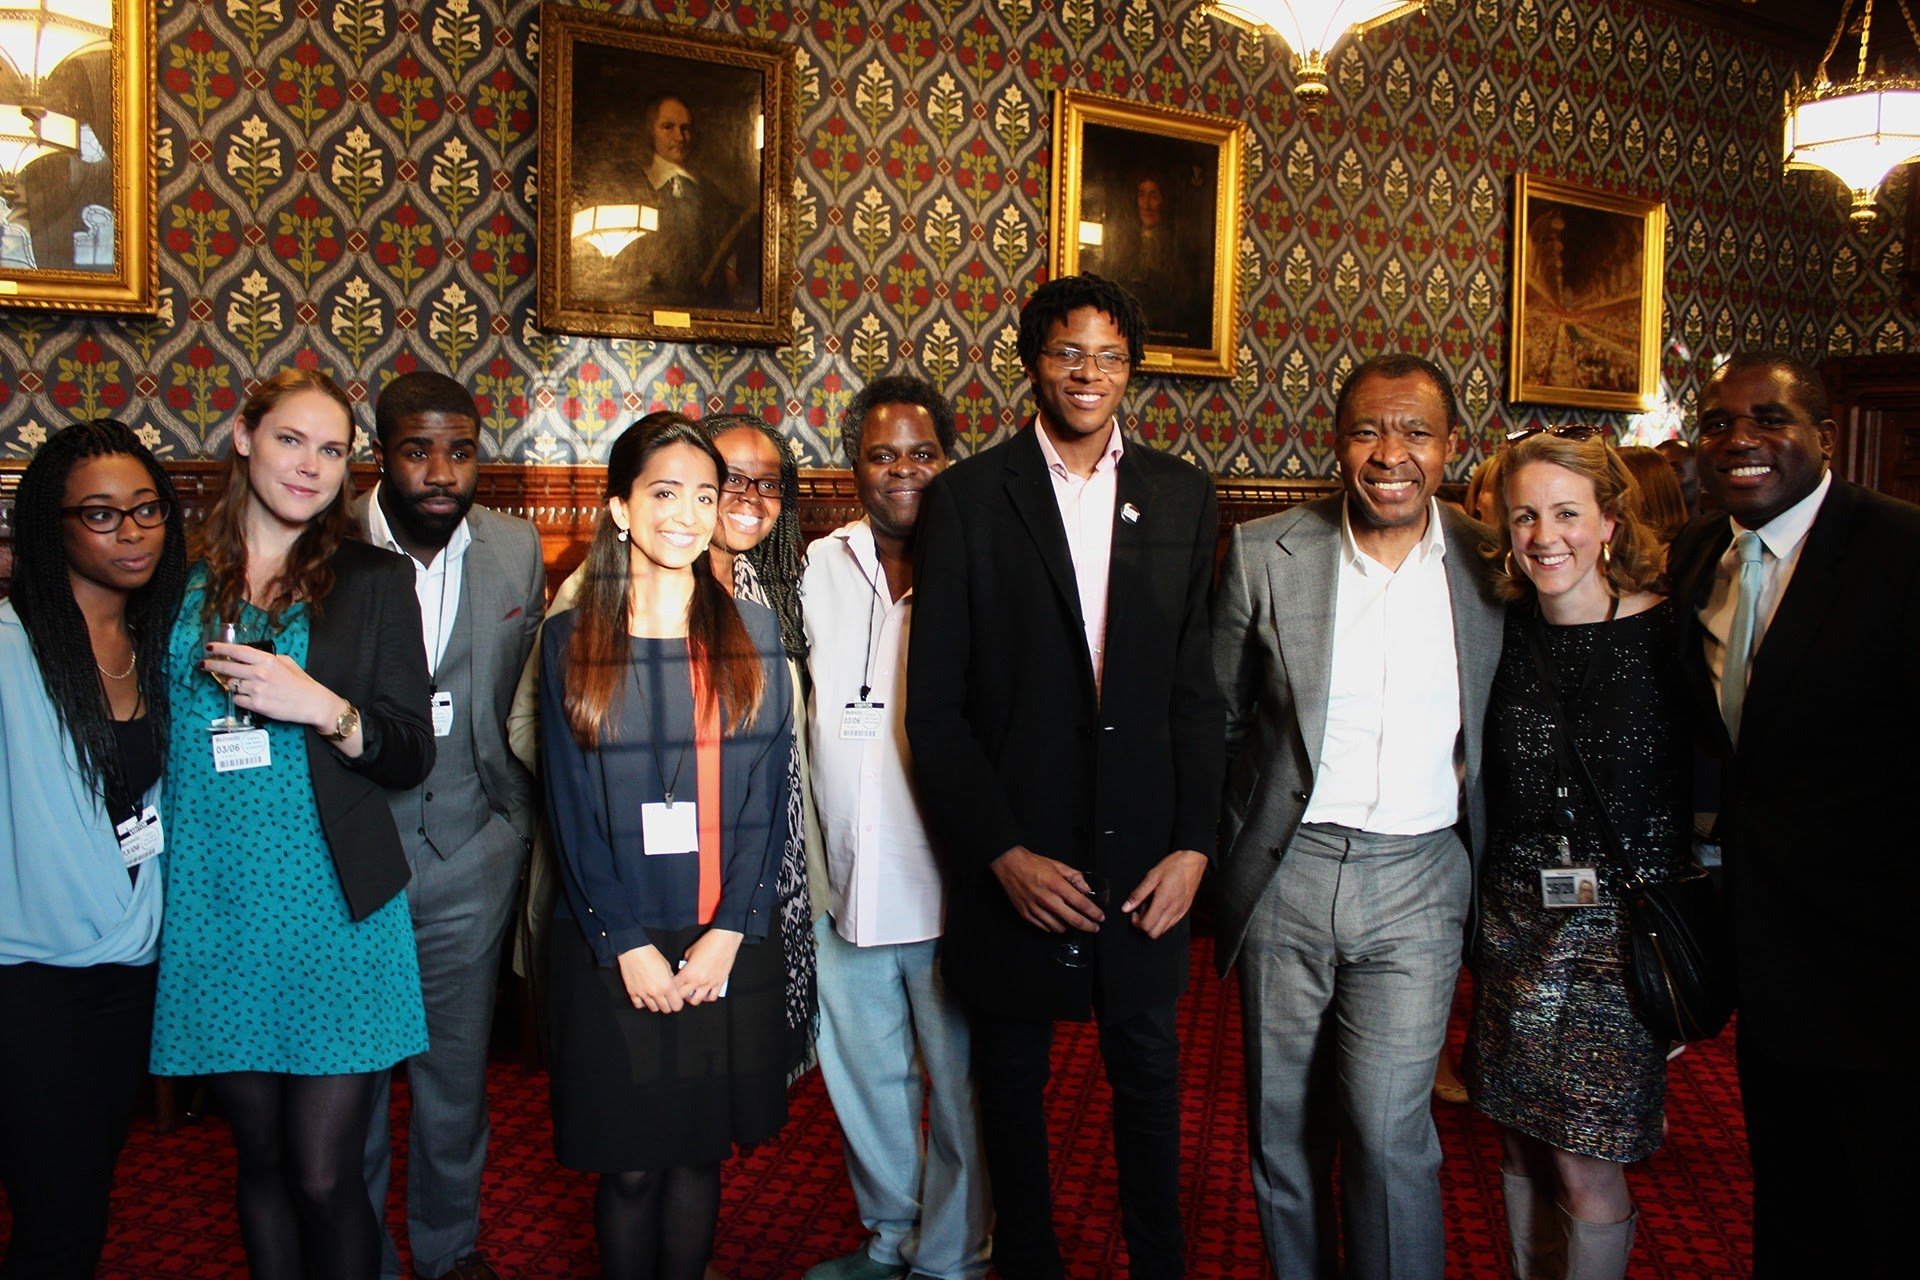 Diaspora Platform launch event in 2015 at the House of Commons (Copy)